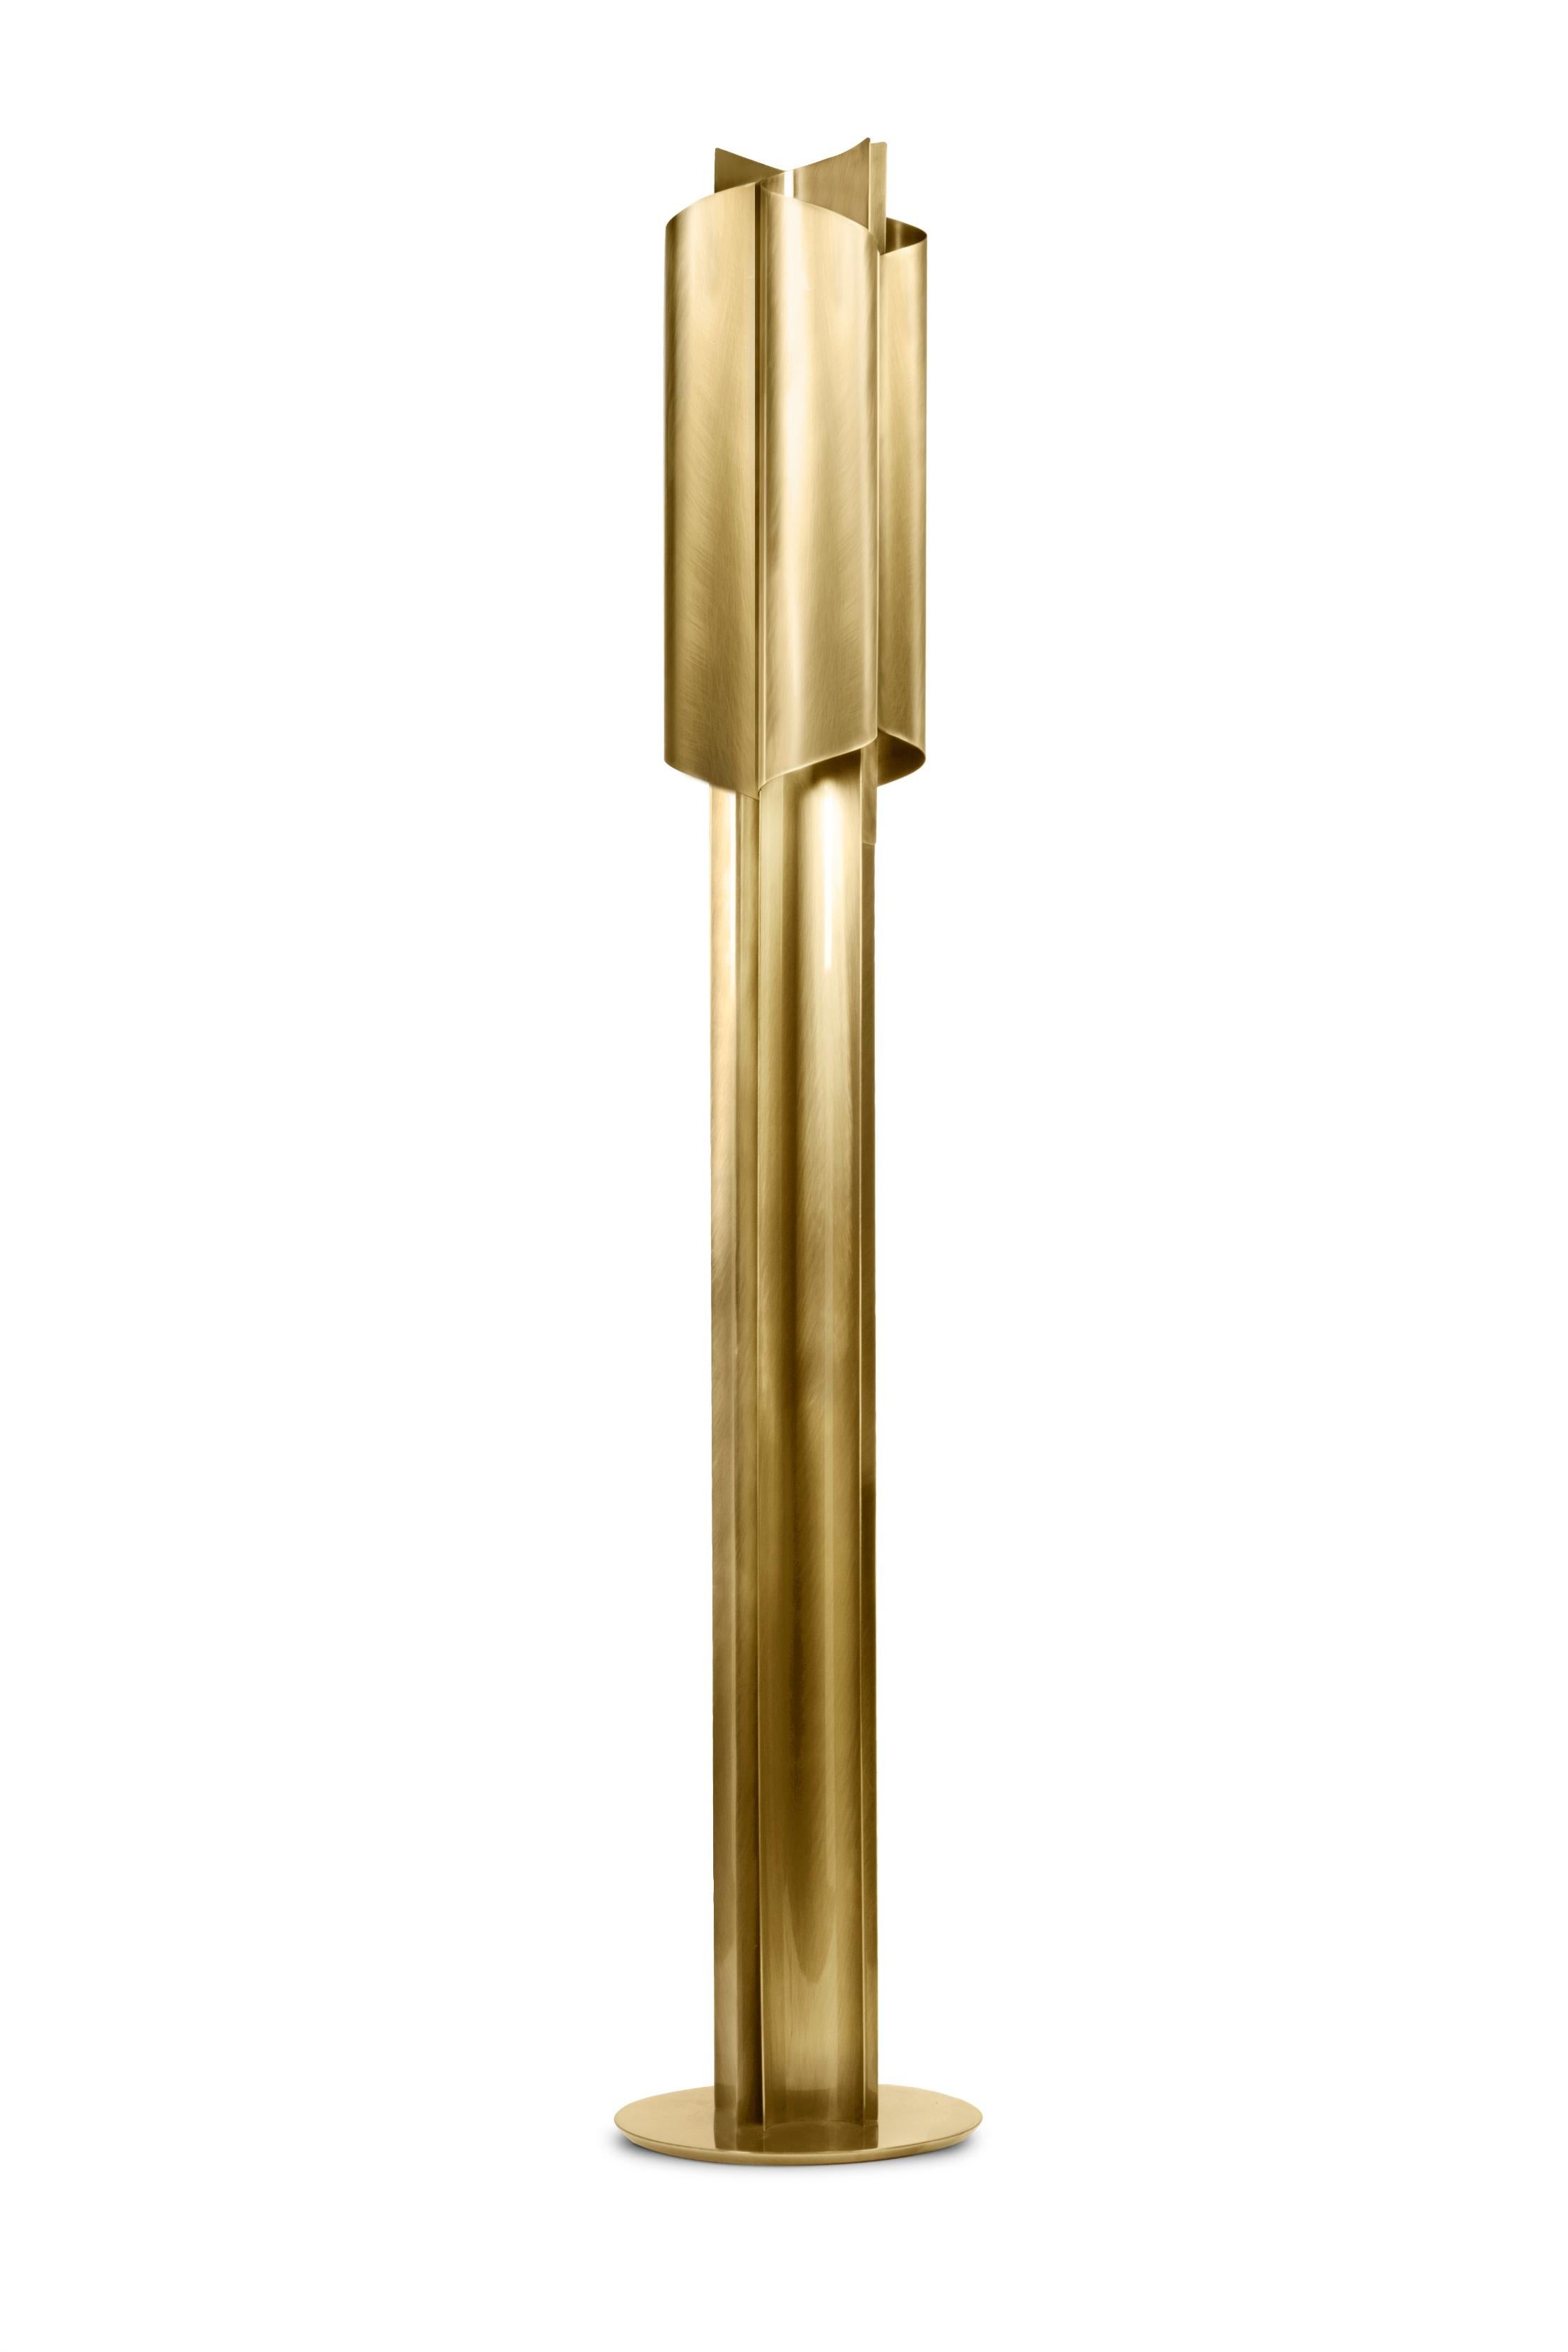 Cyrus Floor Lamp in Polished Brass by Brabbu In New Condition For Sale In New York, NY